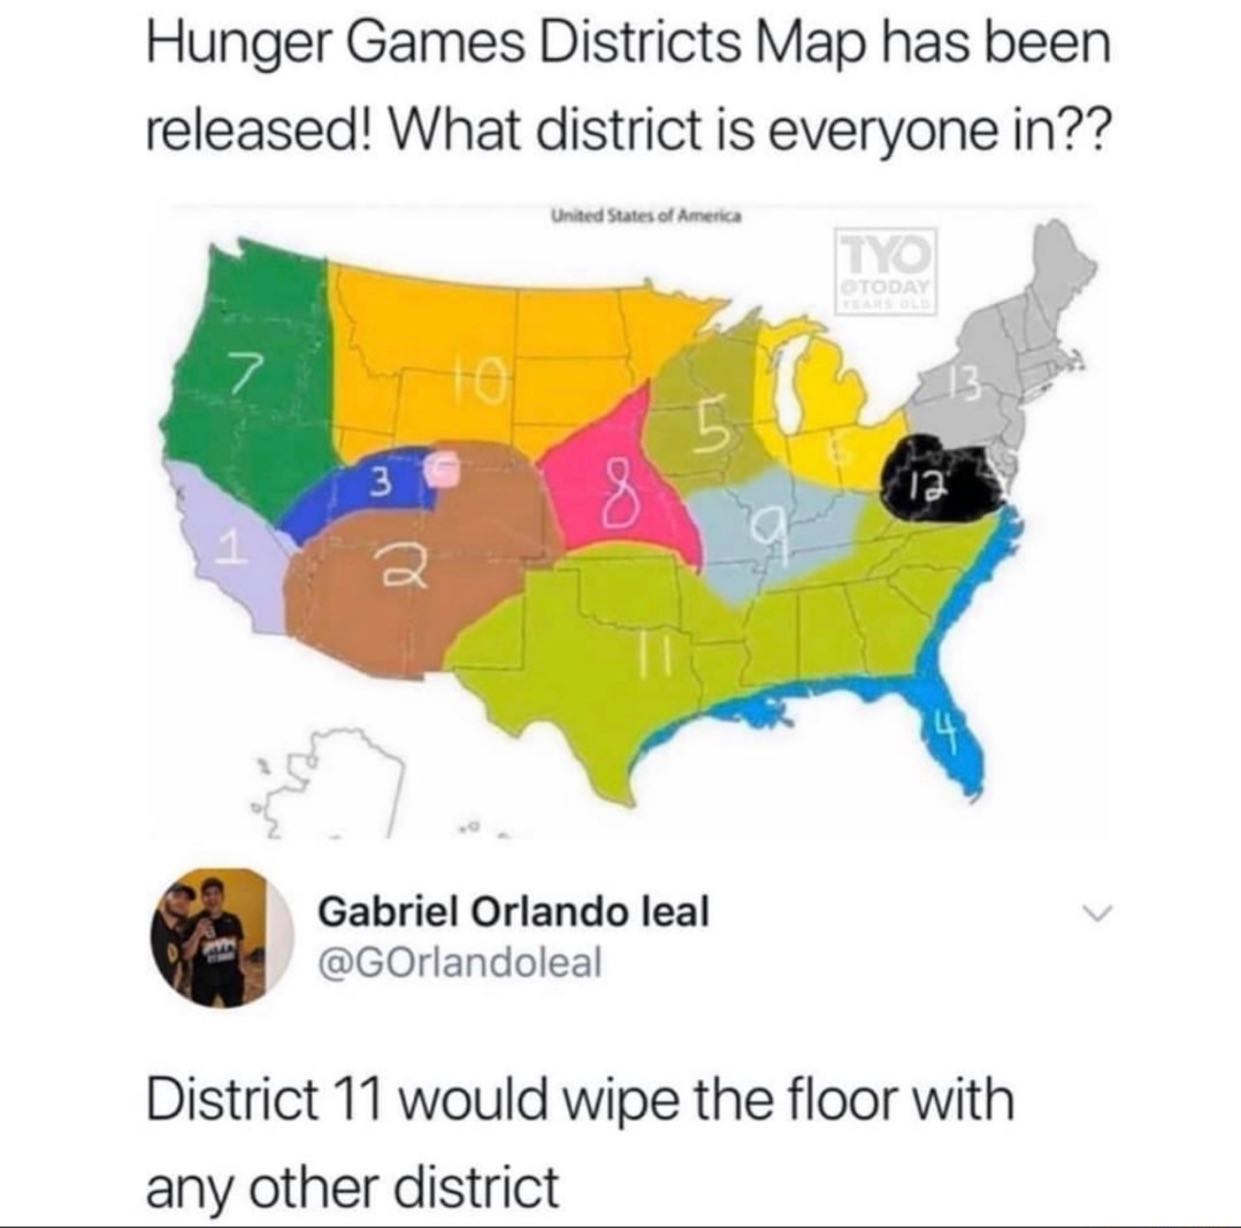 dank memes - hunger games map - Hunger Games Districts Map has been released! What district is everyone in?? United States of America Tyo Today 7 5 3 8 12 Gabriel Orlando leal District 11 would wipe the floor with any other district